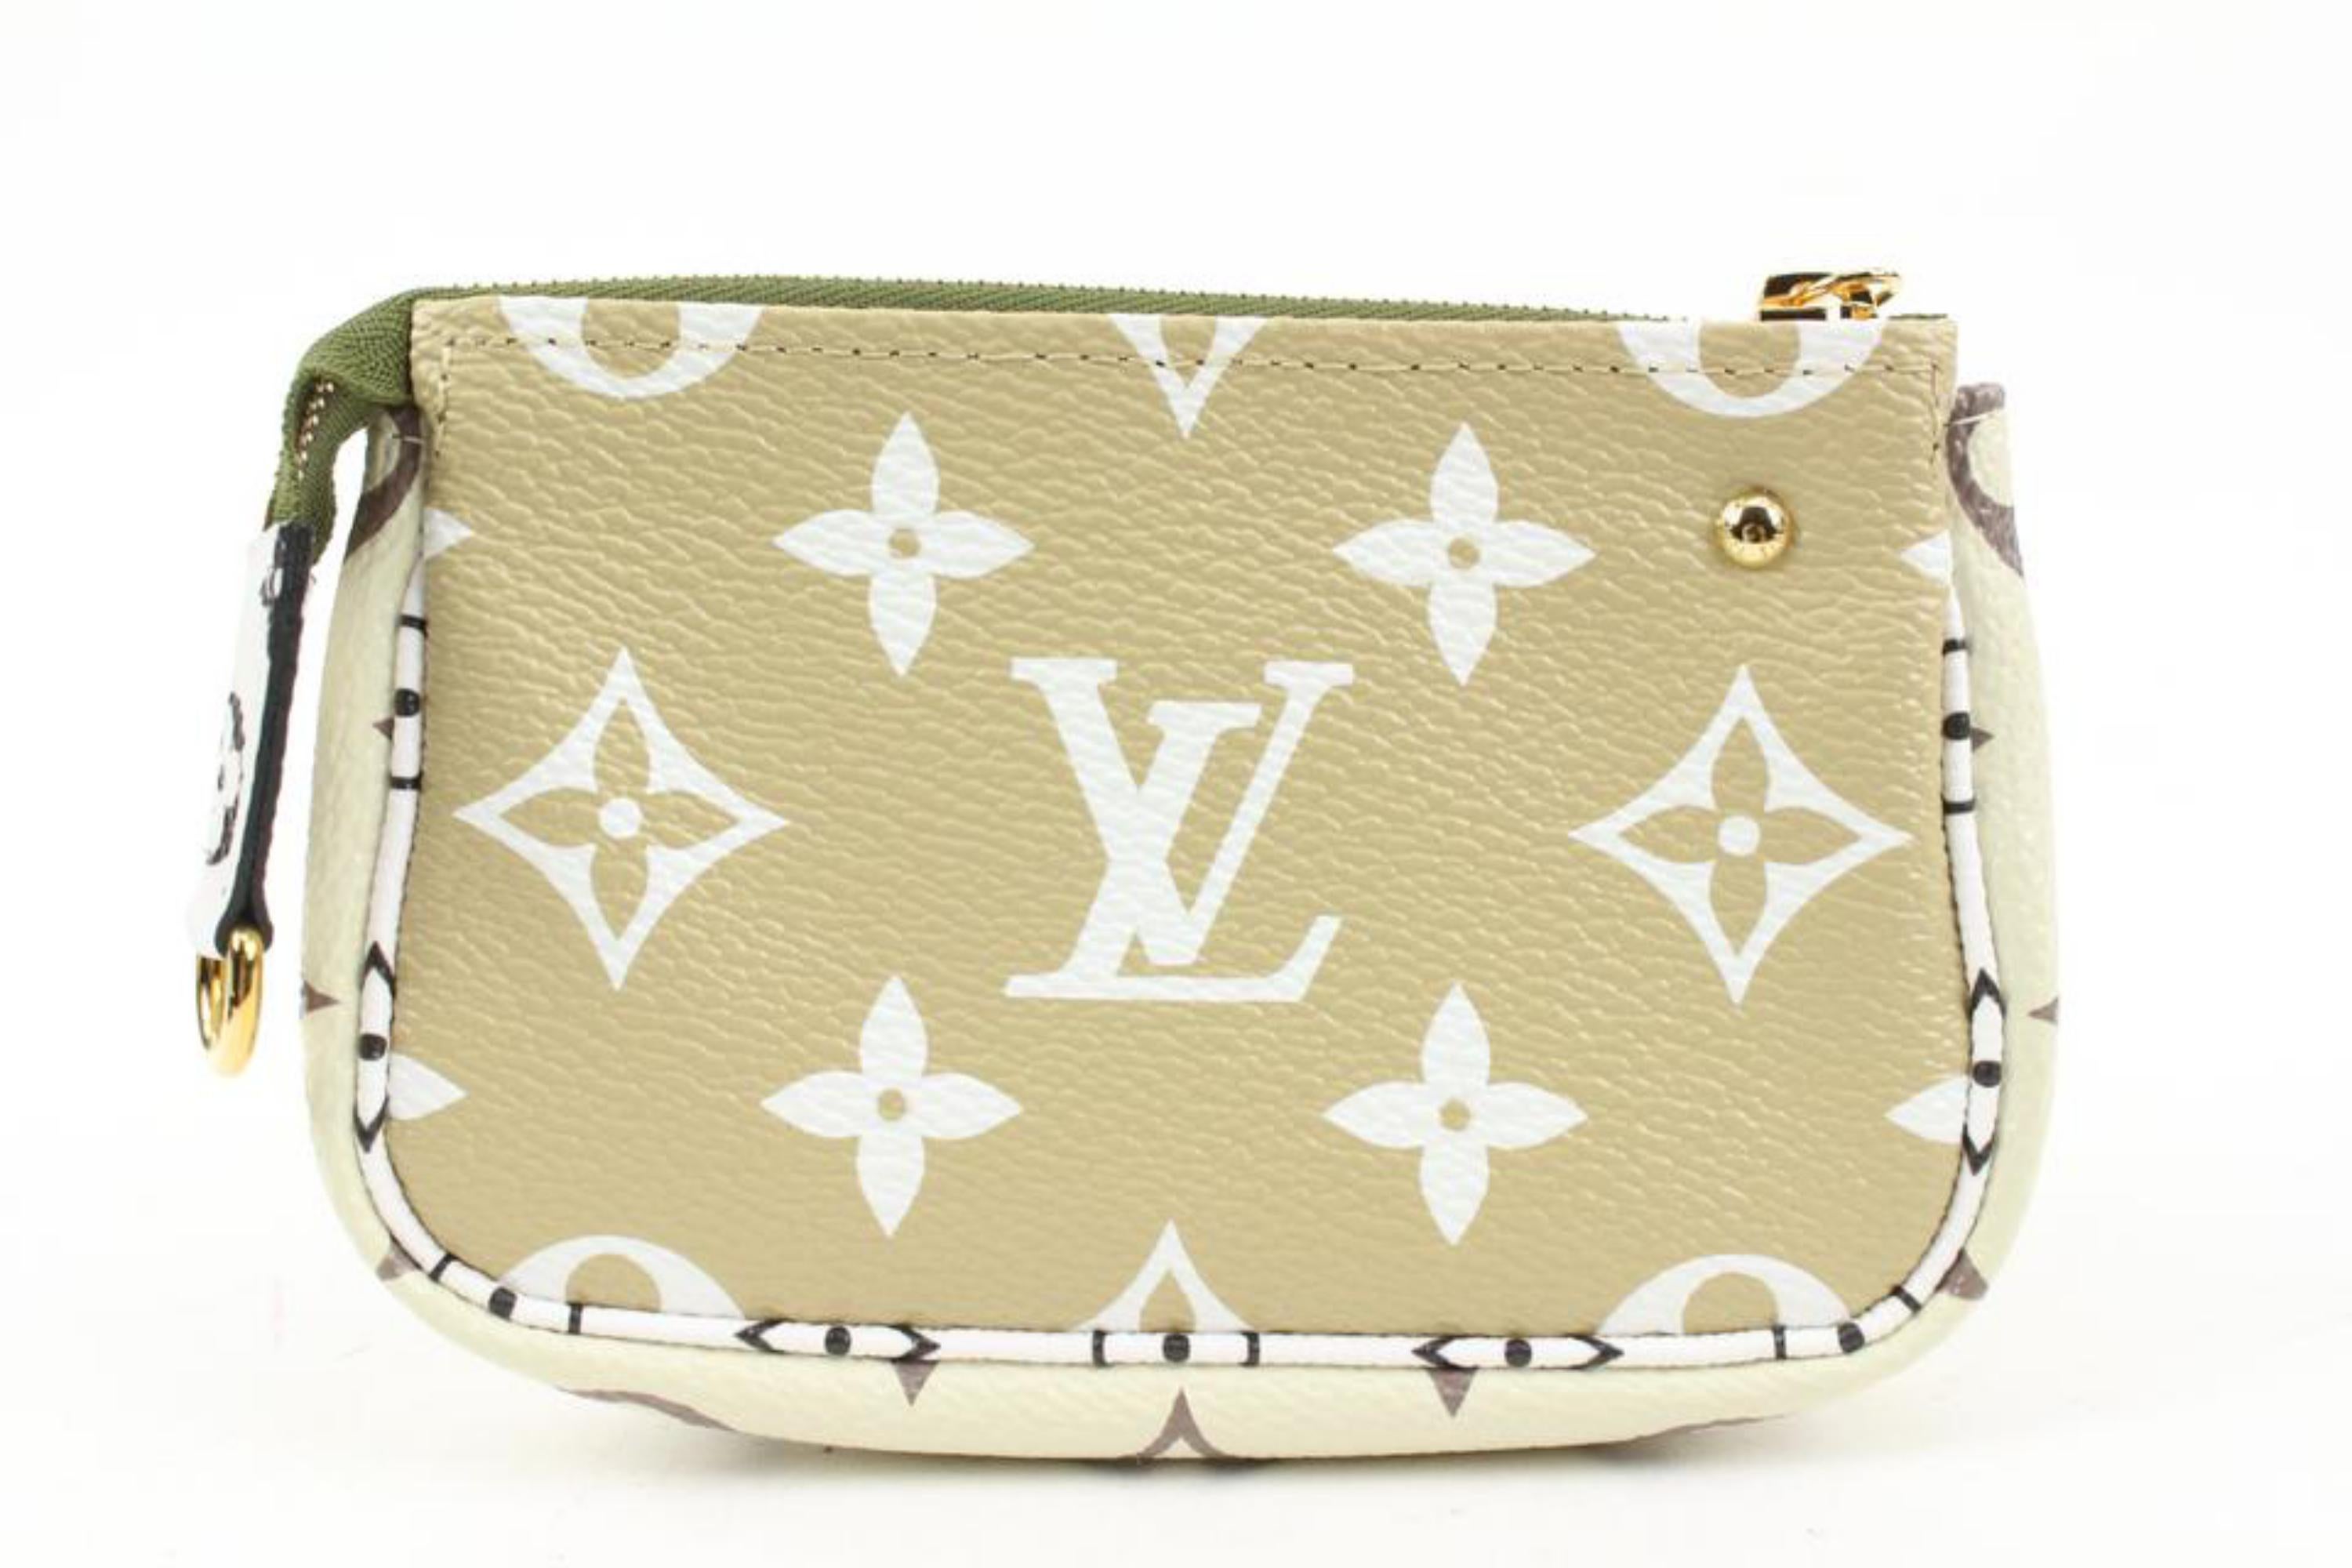 Louis Vuitton Khaki Green x Beige Monogram Giants Micro Pochette Change Pouch 74l24S
Date Code/Serial Number: SF2119
Made In: France
Measurements: Length:  4.75